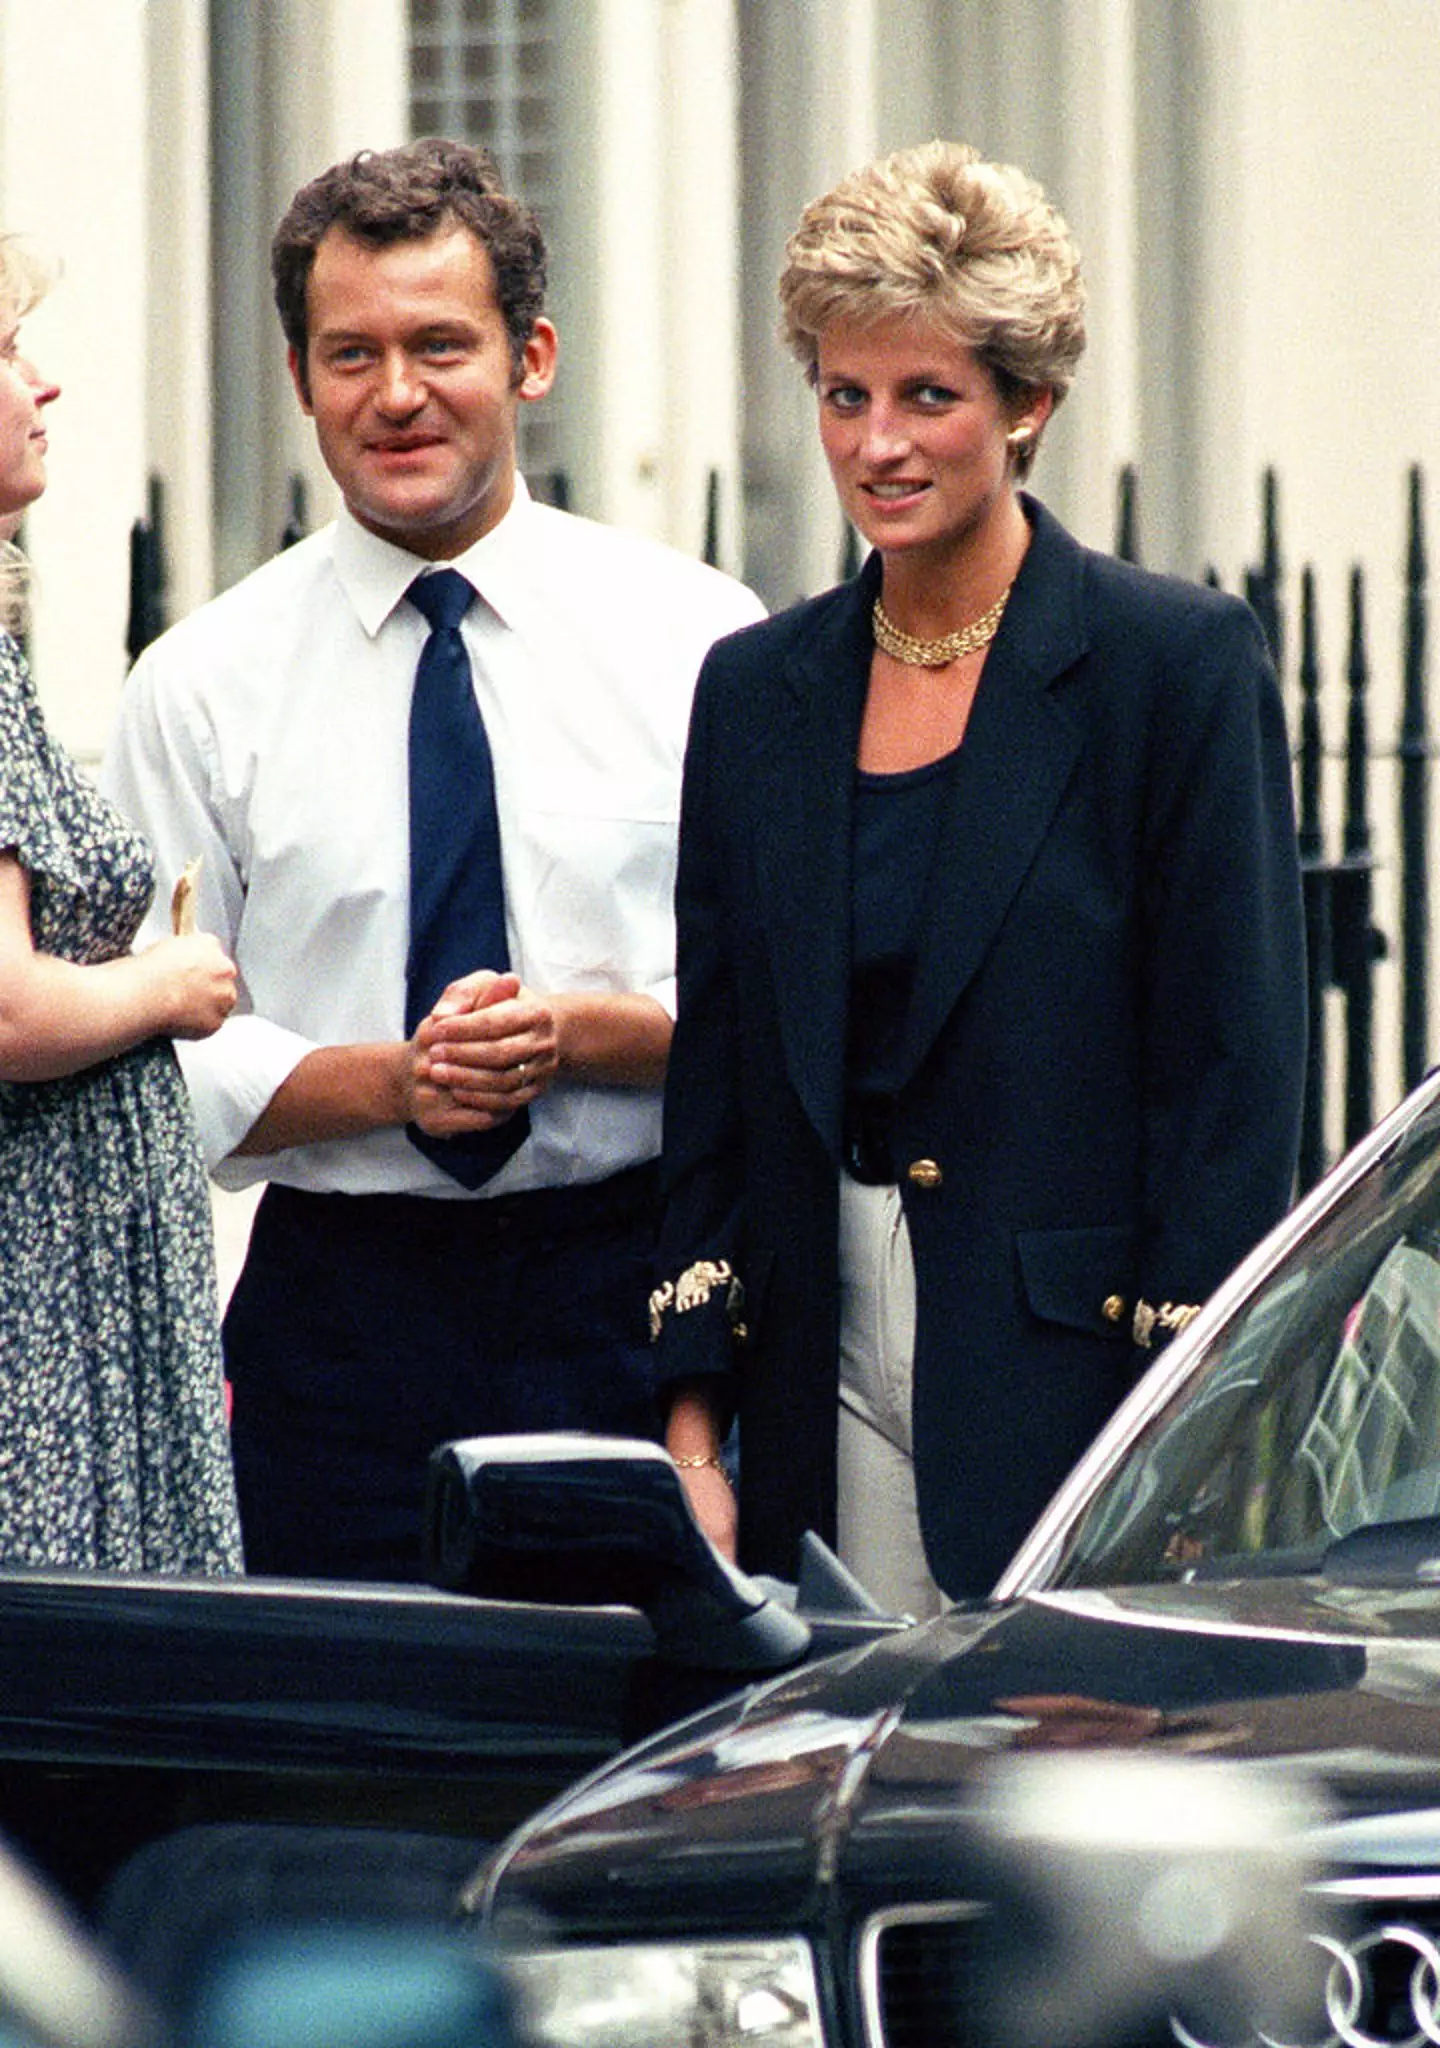 Paul Burrell with Princess Diana in 1994.